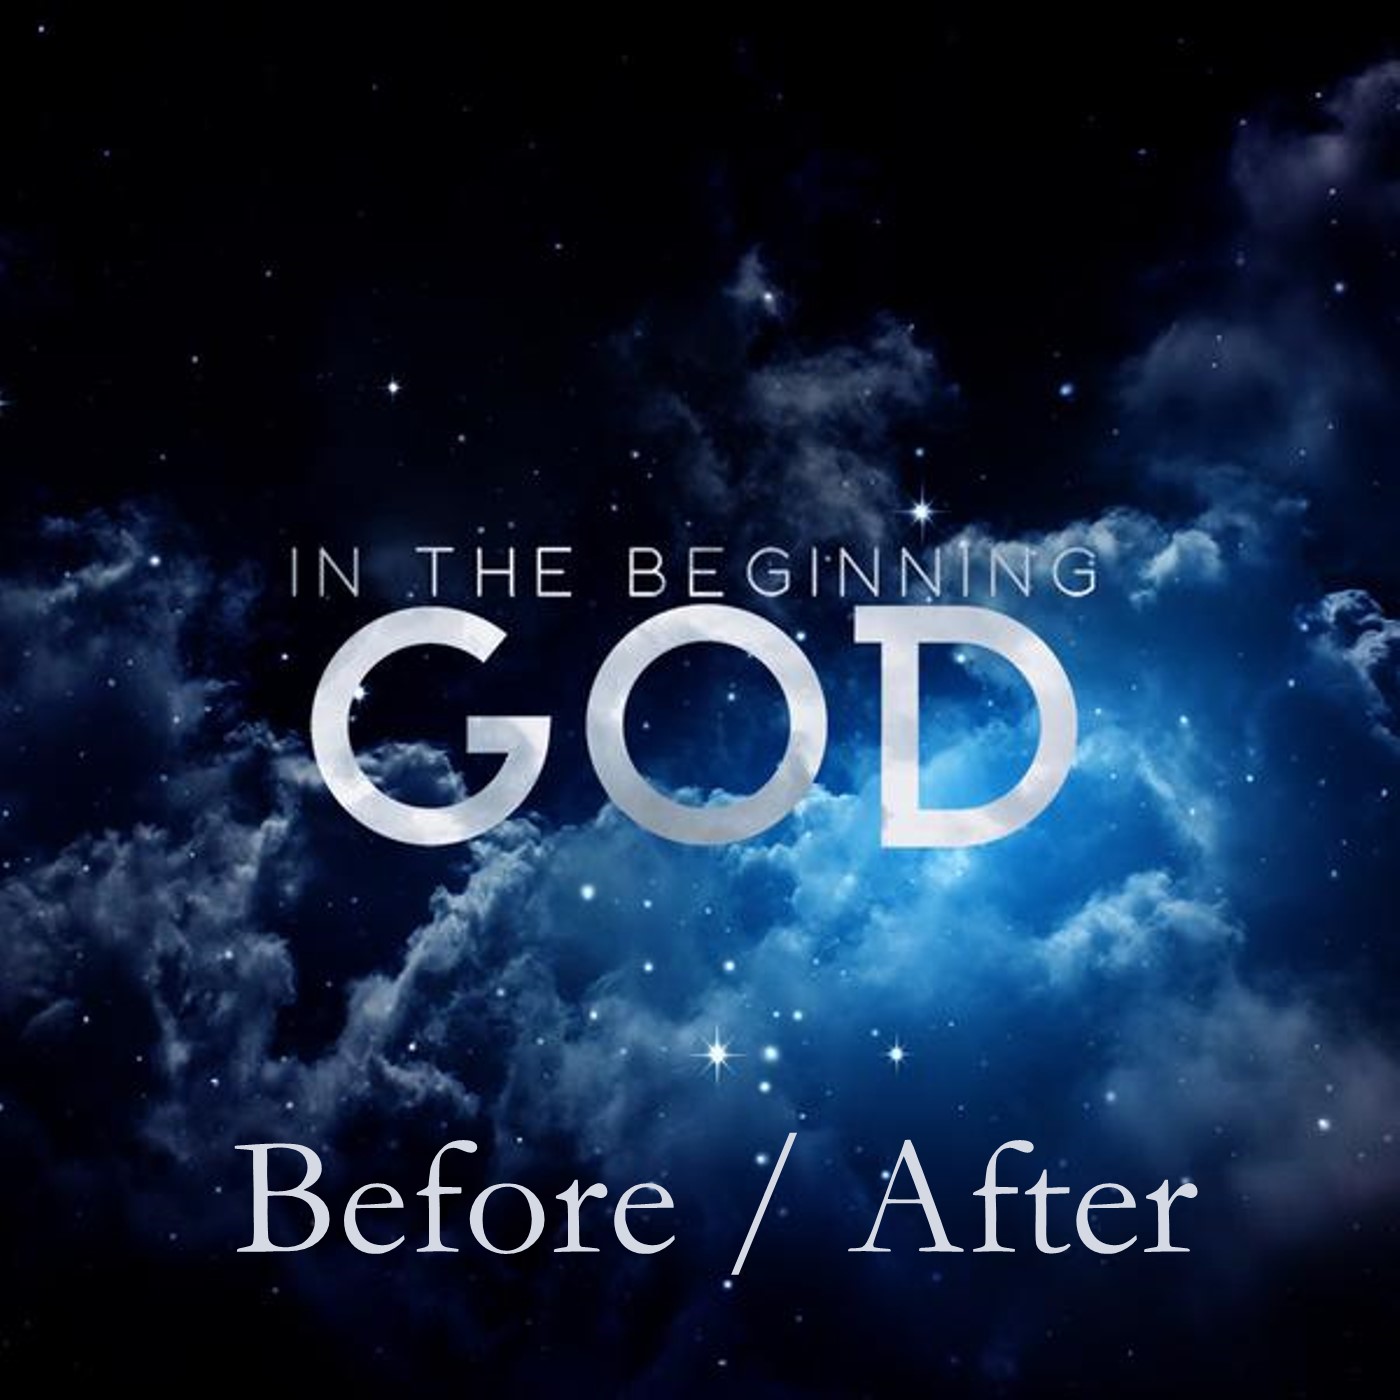 In the Beginning Before / After